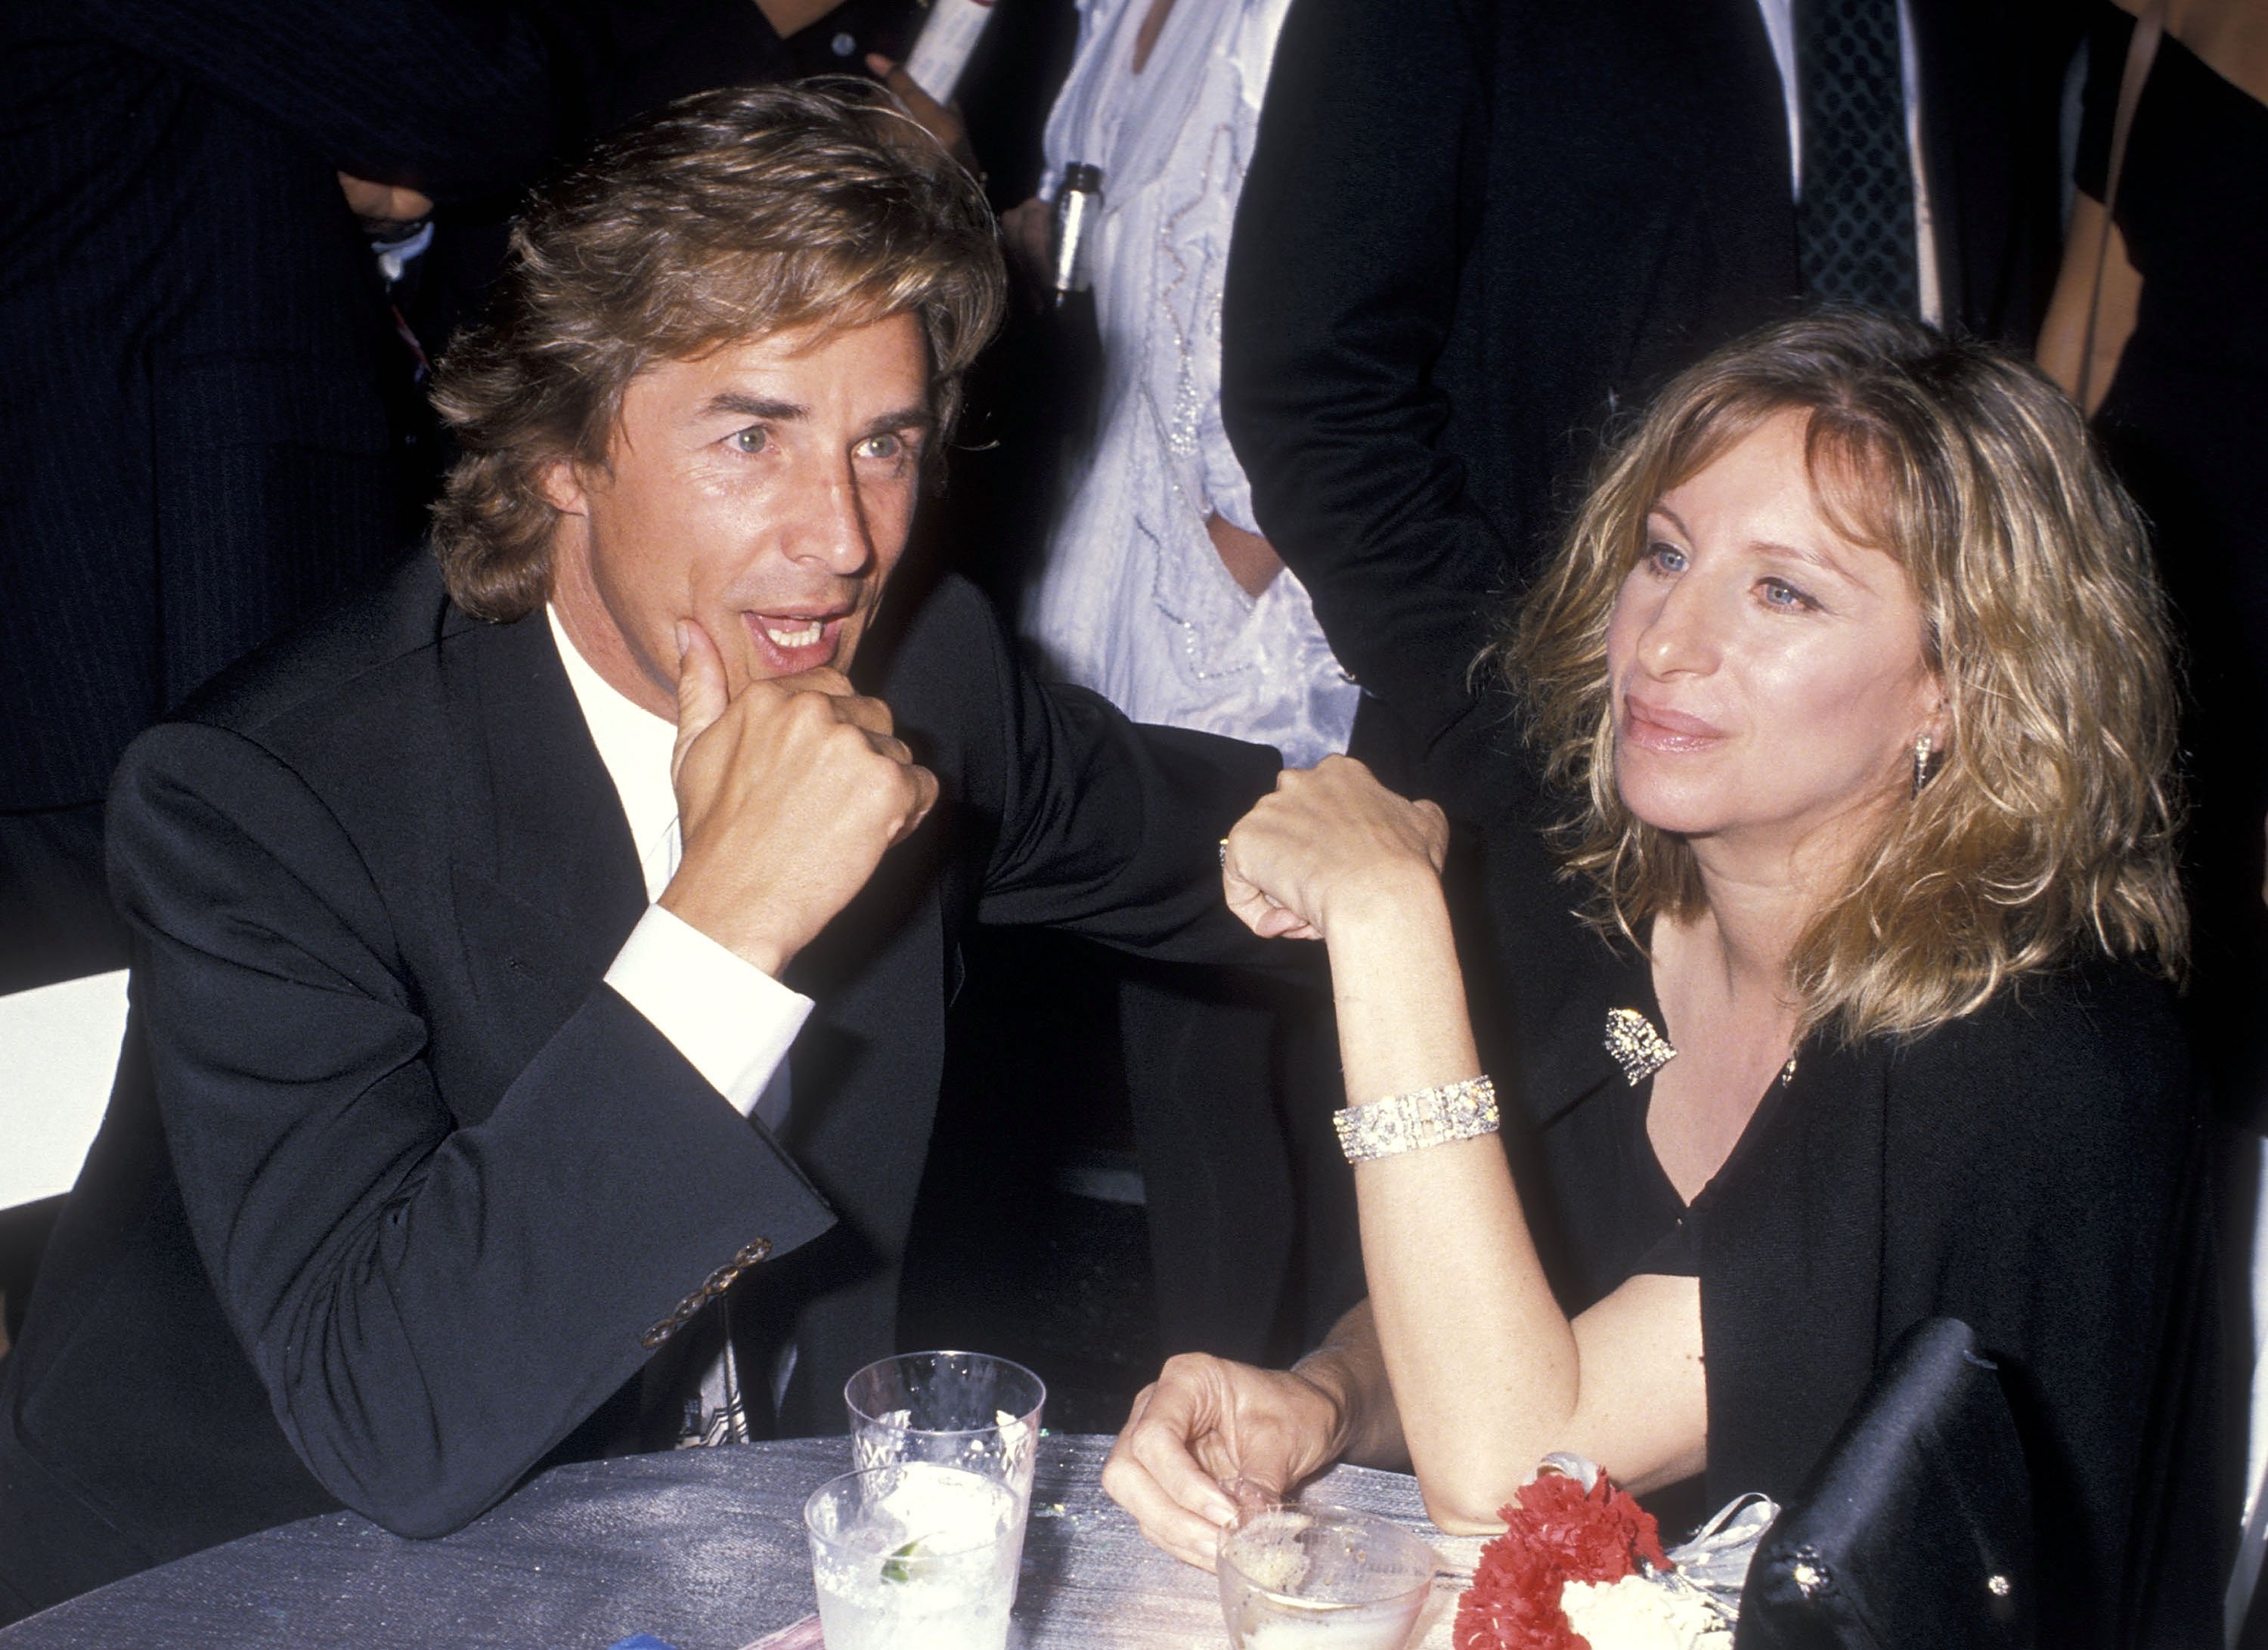 Actor Don Johnson and actres/singer Barbra Streisand at the "Sweet Hearts Dance" Westwood Premiere and After Party on September 18, 1988 at the Avco Centre Cinemas in Westwood, California. | Source: Getty Images